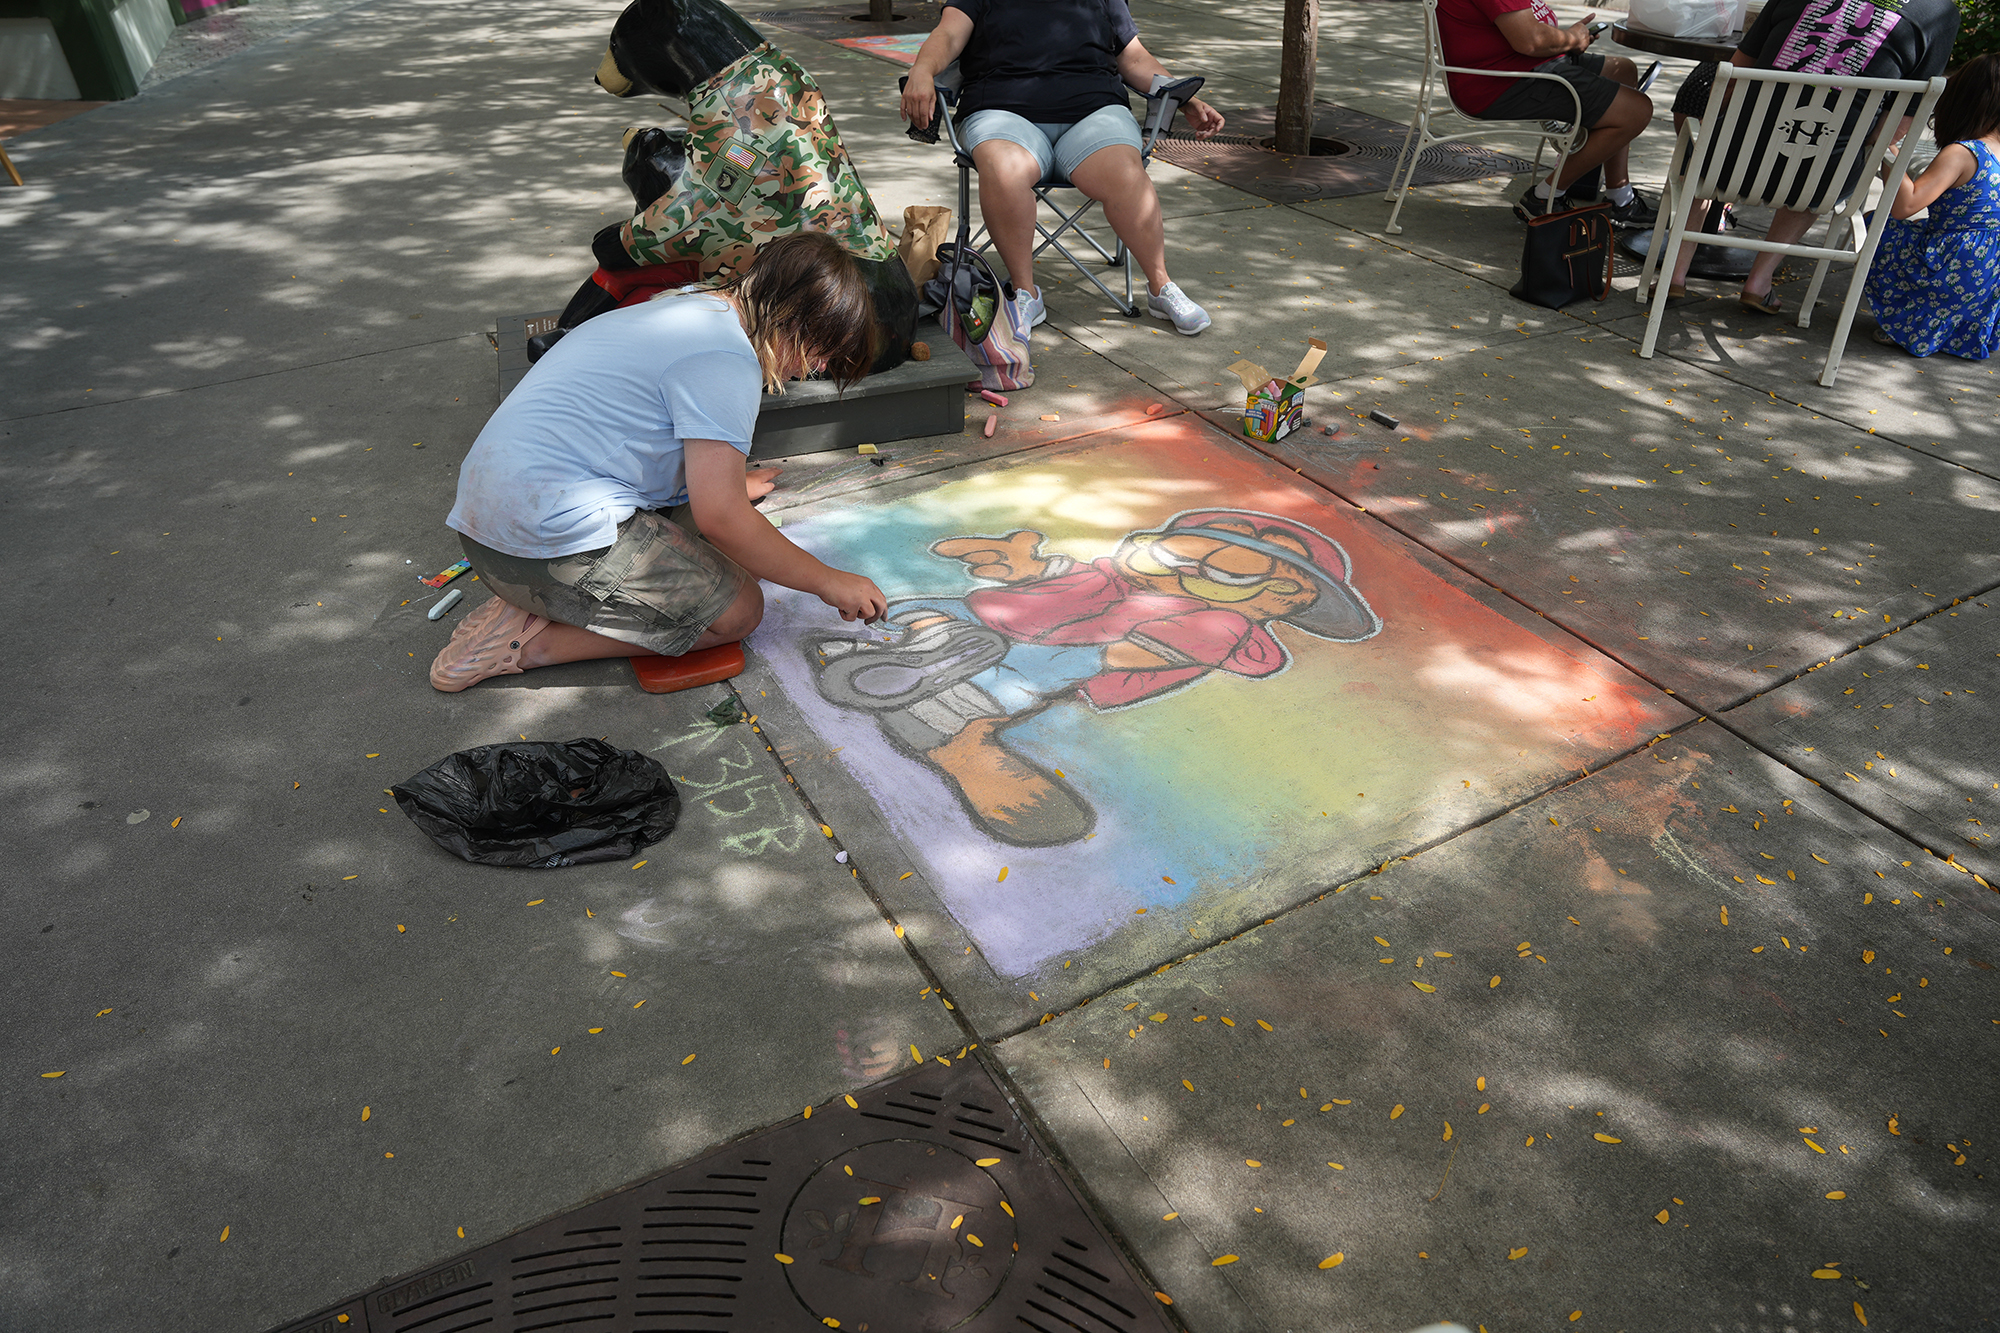 The Colorful Tradition of “Chalk It Up” in Hendersonville, N.C.